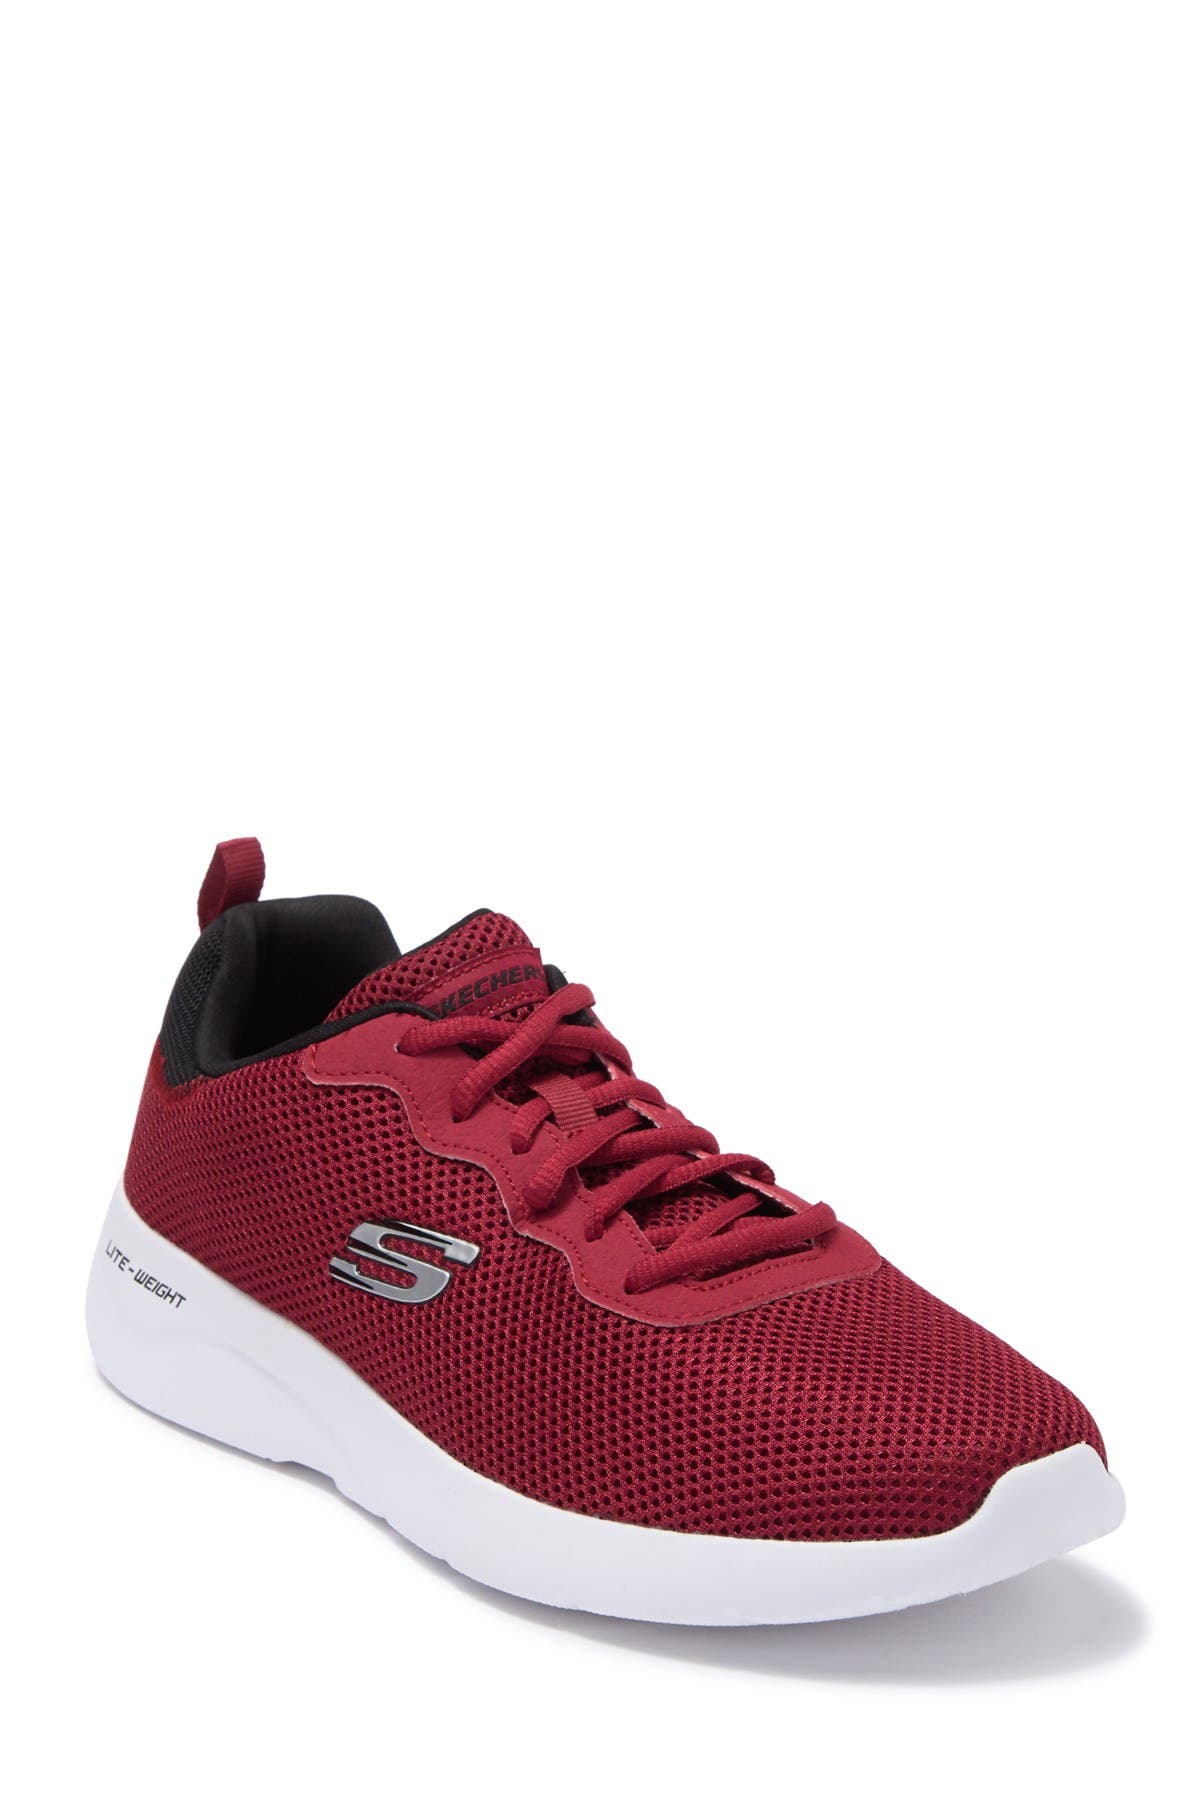 skechers dynamight lifestyle